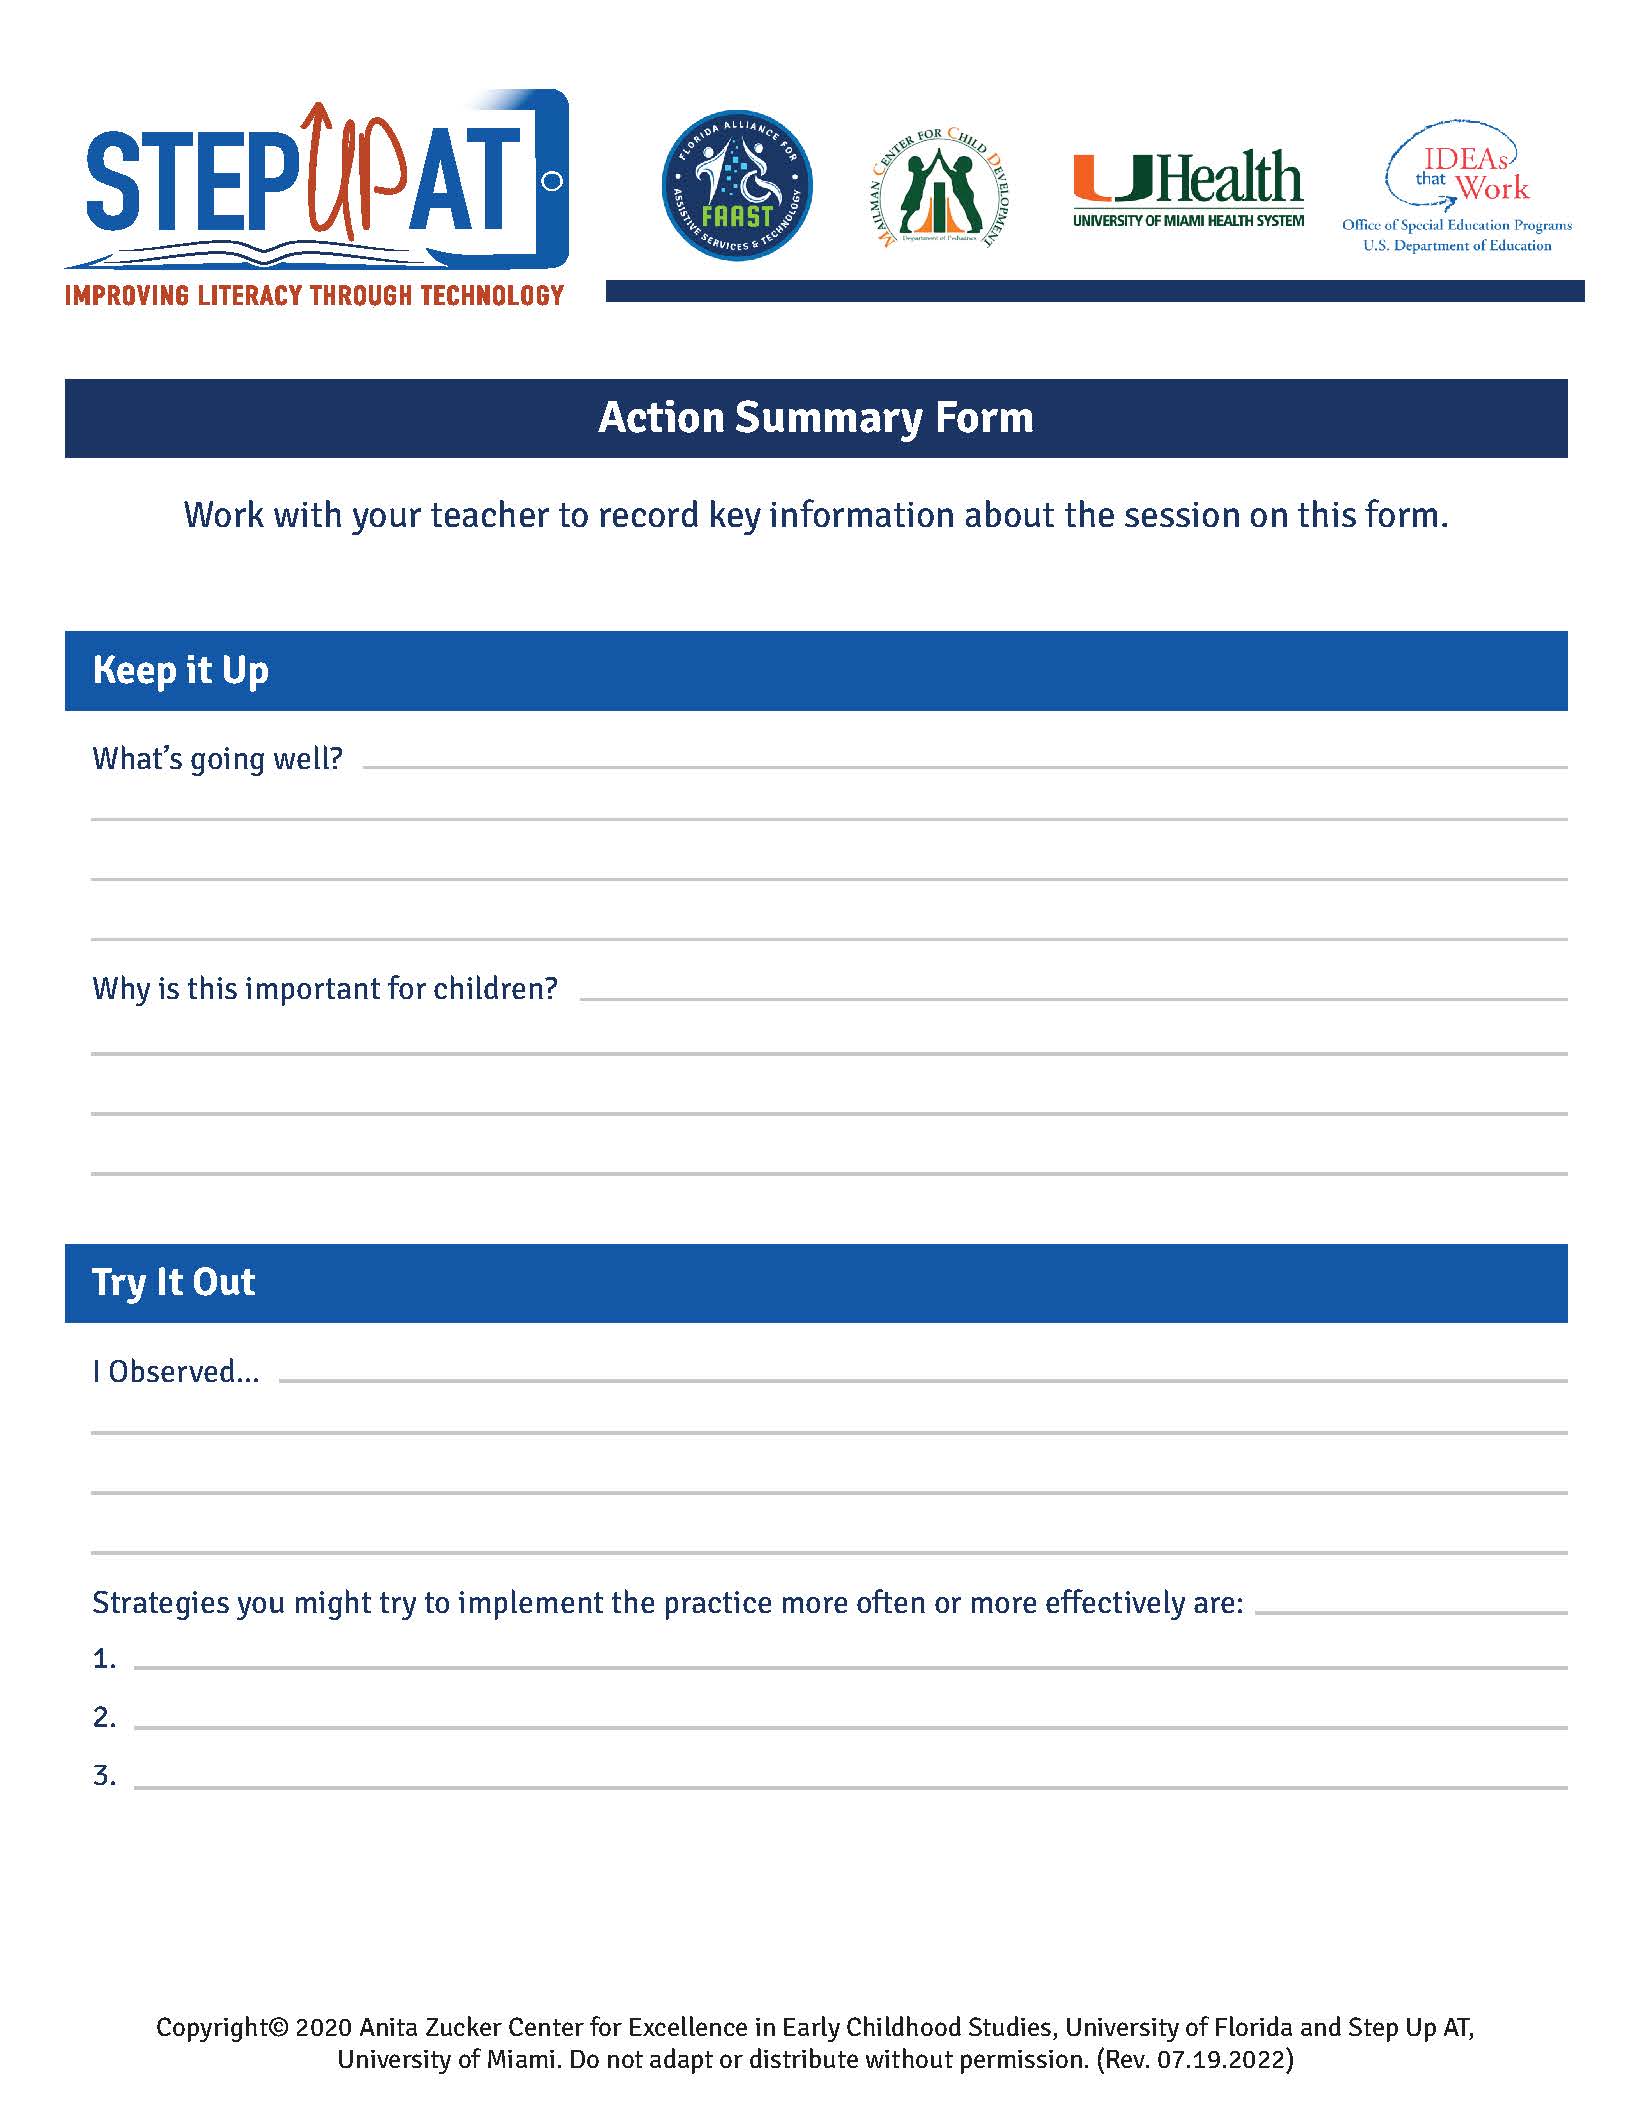 Step up AT Action Summary Form